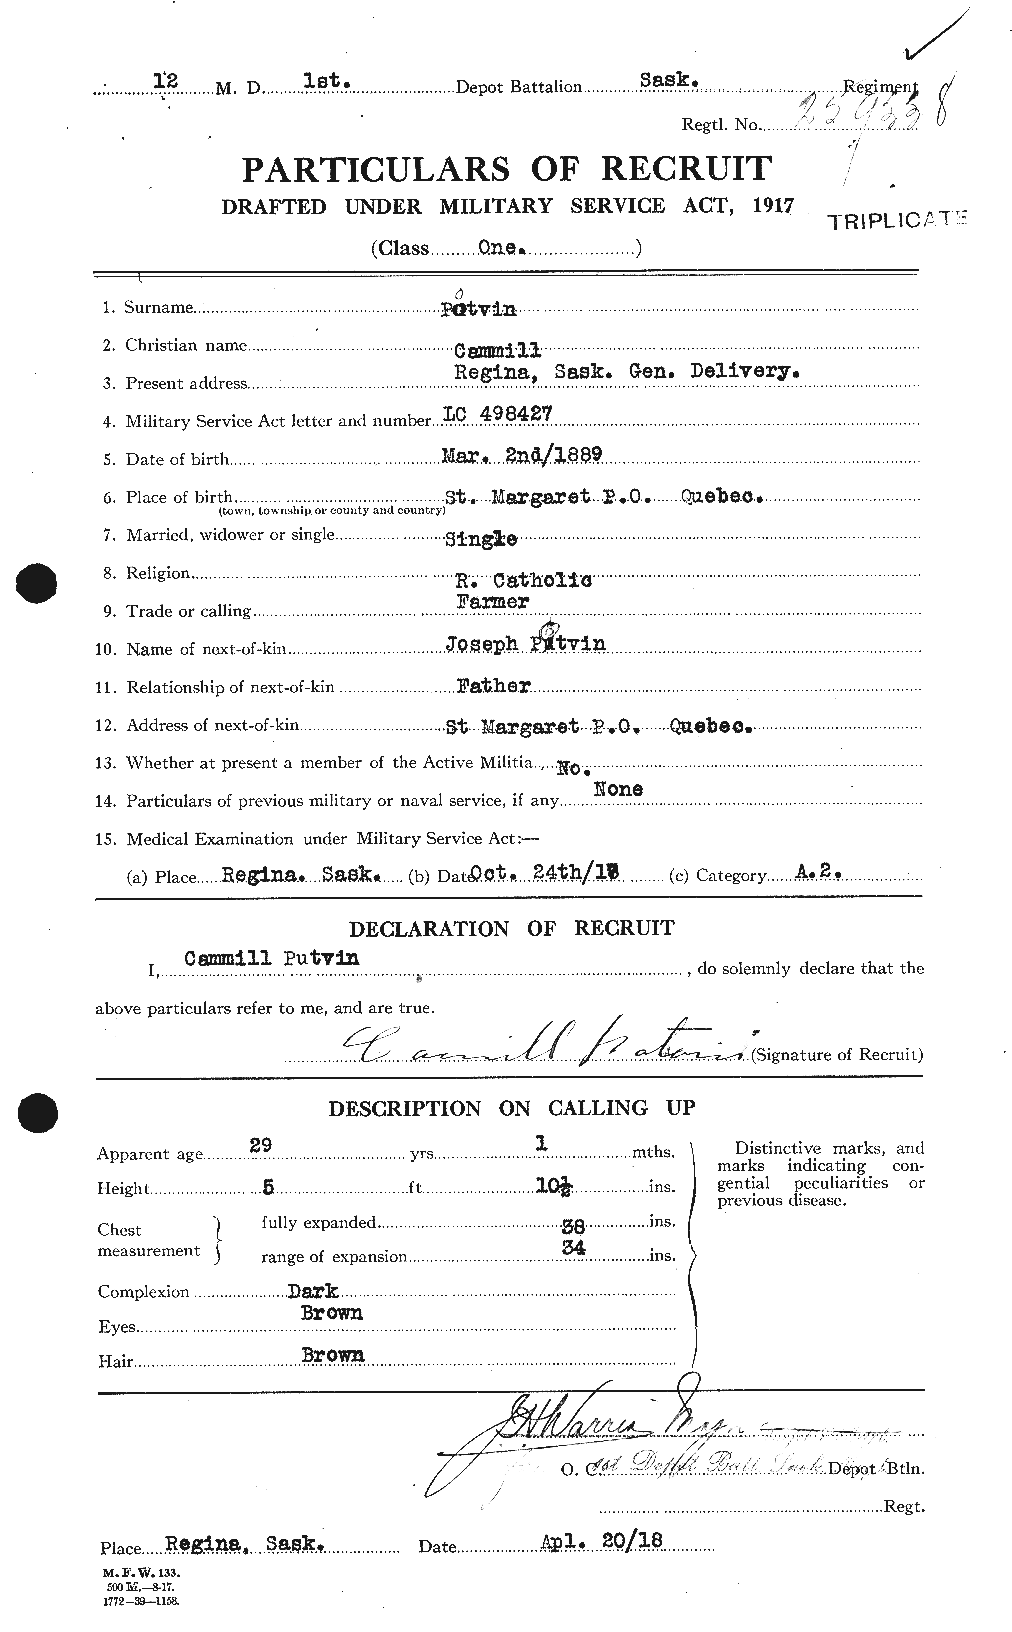 Personnel Records of the First World War - CEF 584616a